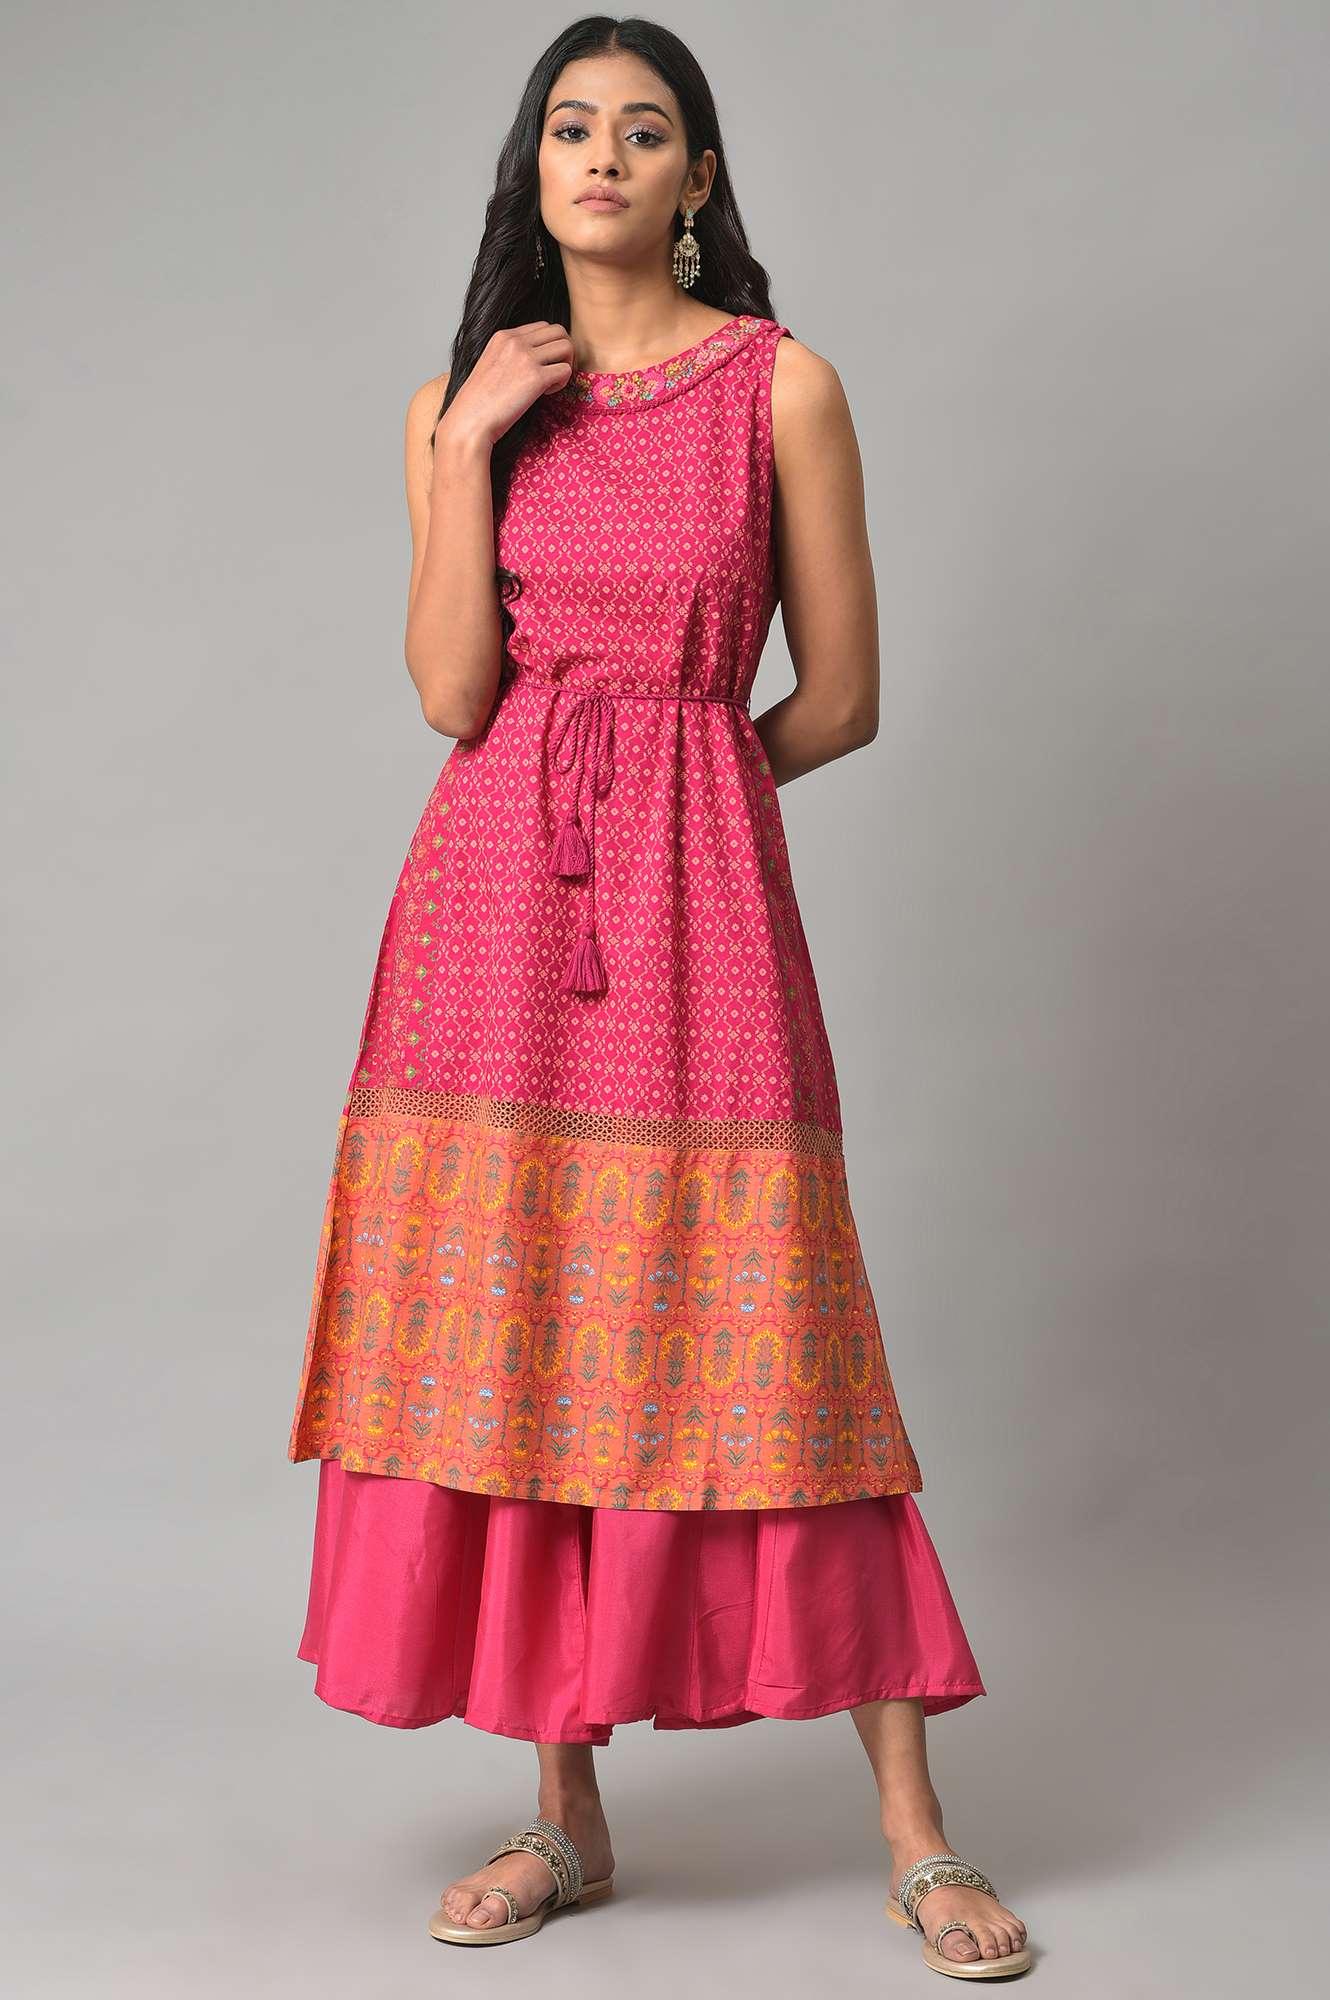 Dark Pink Sleeveless A-Line Dress With Embroidery - wforwoman